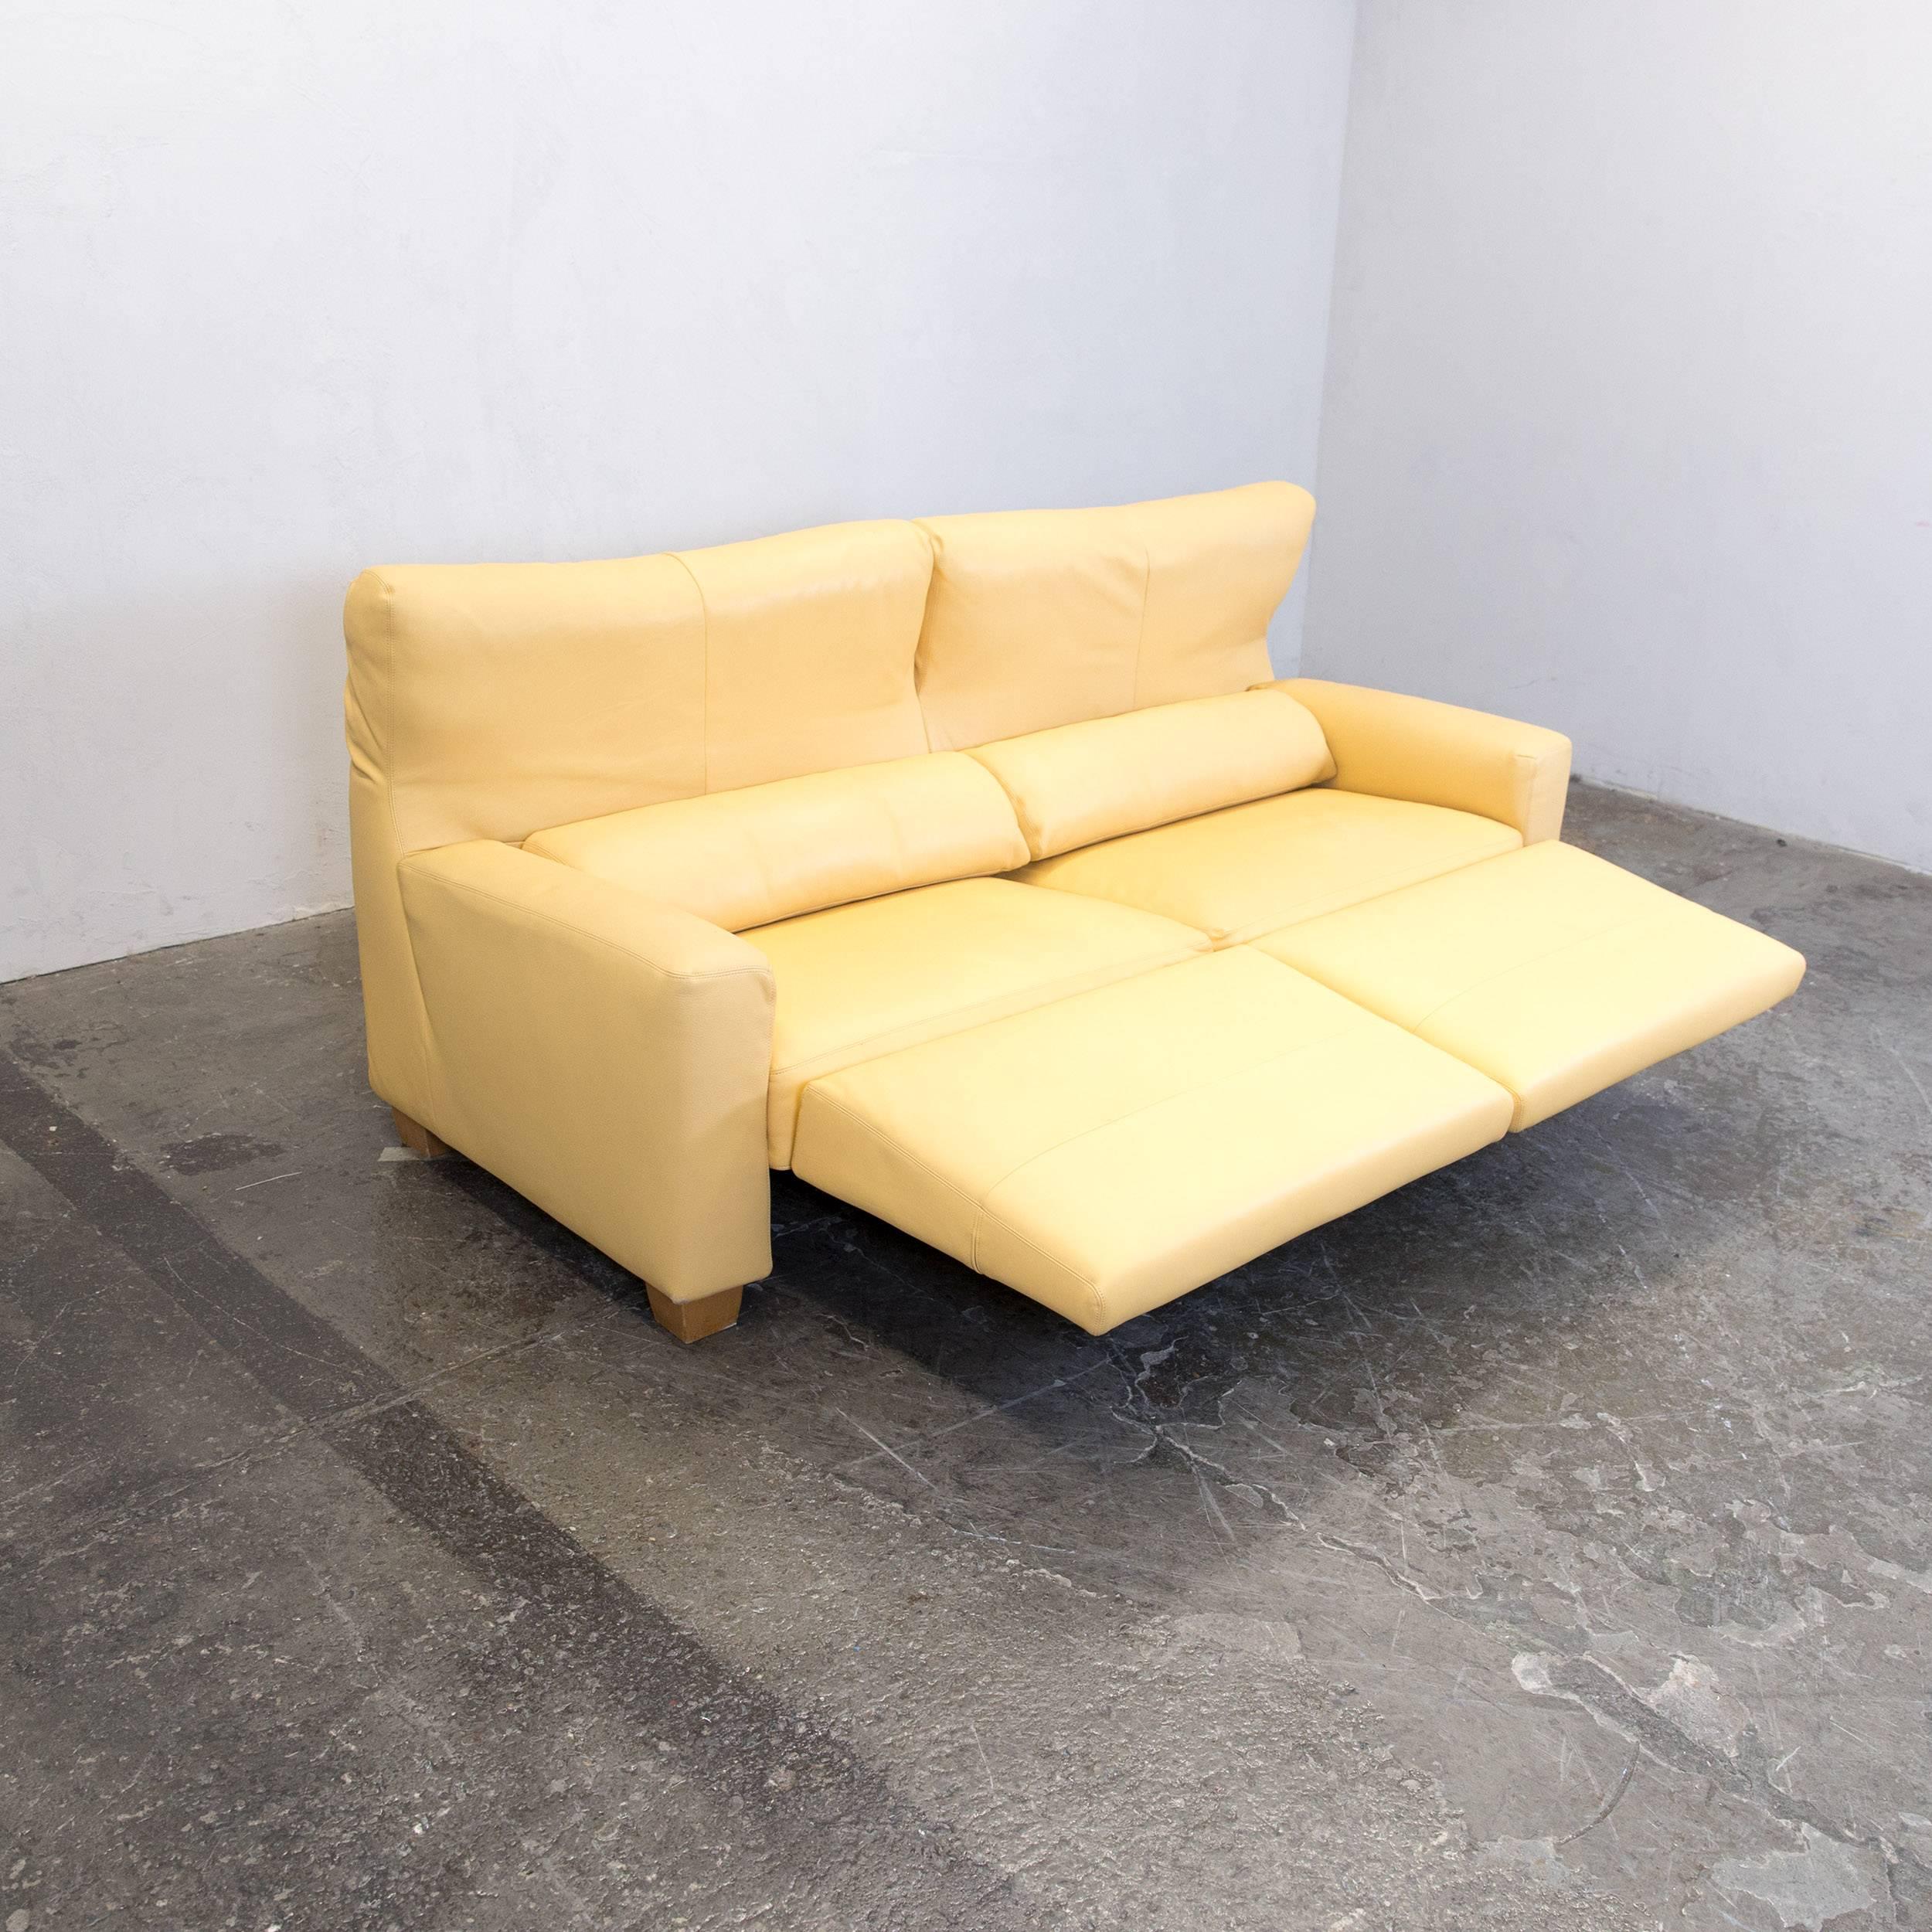 Yellow orange FSM leather couch relax function three-seat sofa in a minimalistic and modern design, made for pure comfort and style.